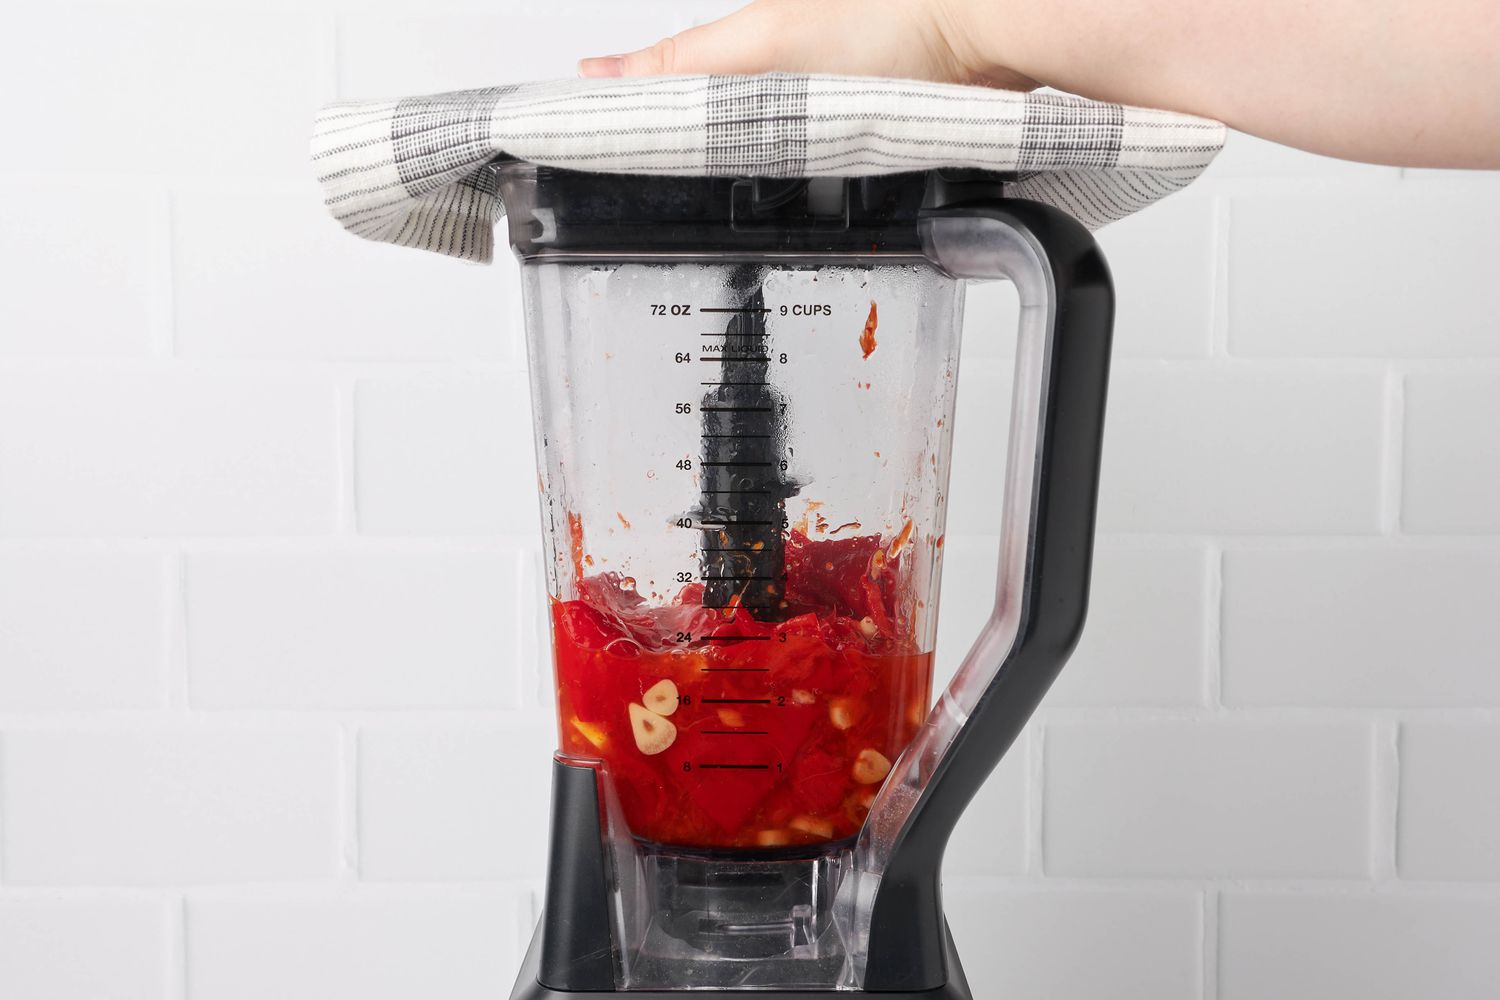 Hot Sauce Mixture in a Blender, and a Hand Holding a Kitchen Towel Onto the Top of the Blender